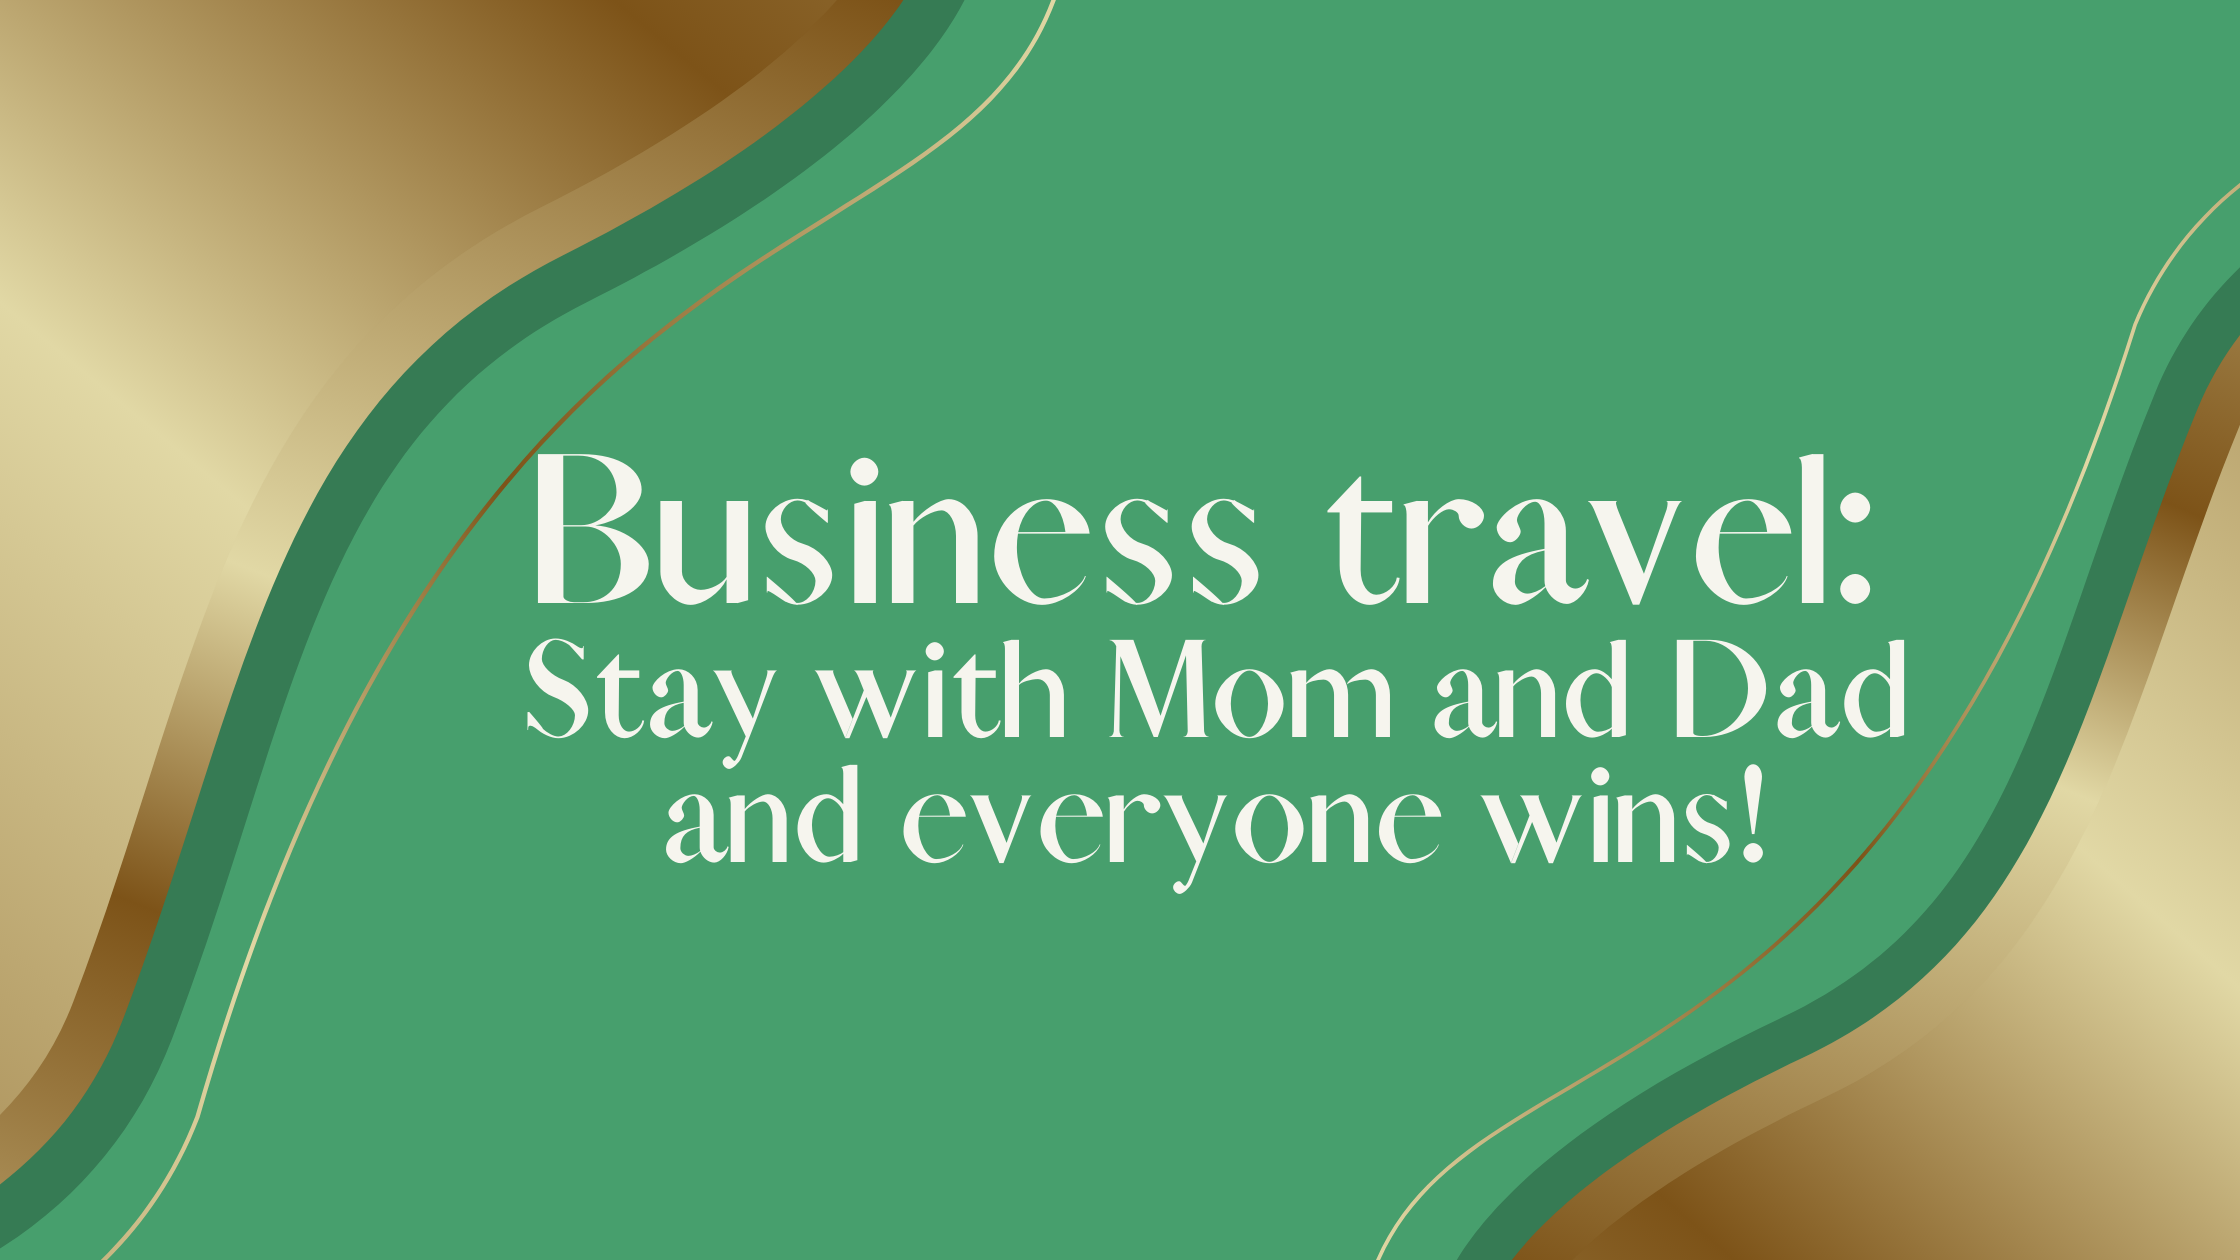 Business travel: Stay with Mom and Dad Hotel